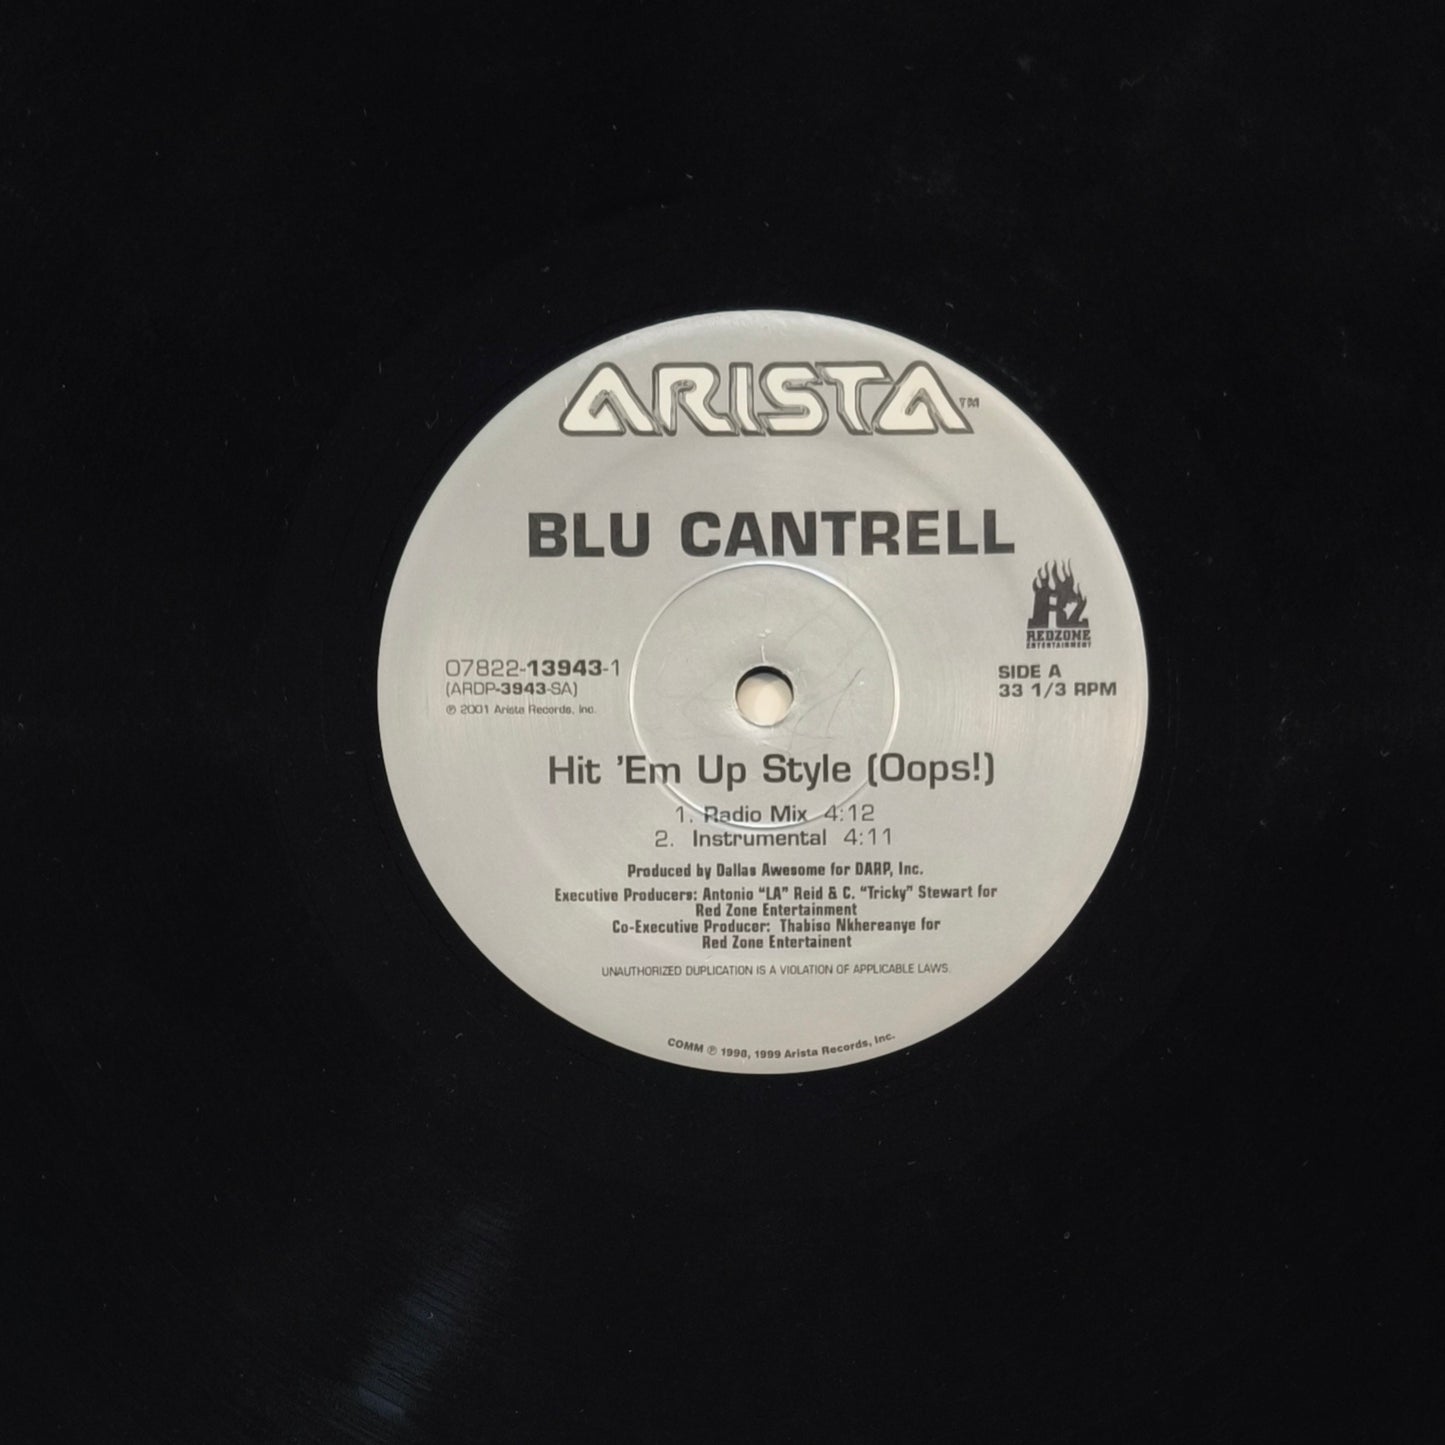 BLUE CANTRELL - Hit 'Em Up Style (Oops!)